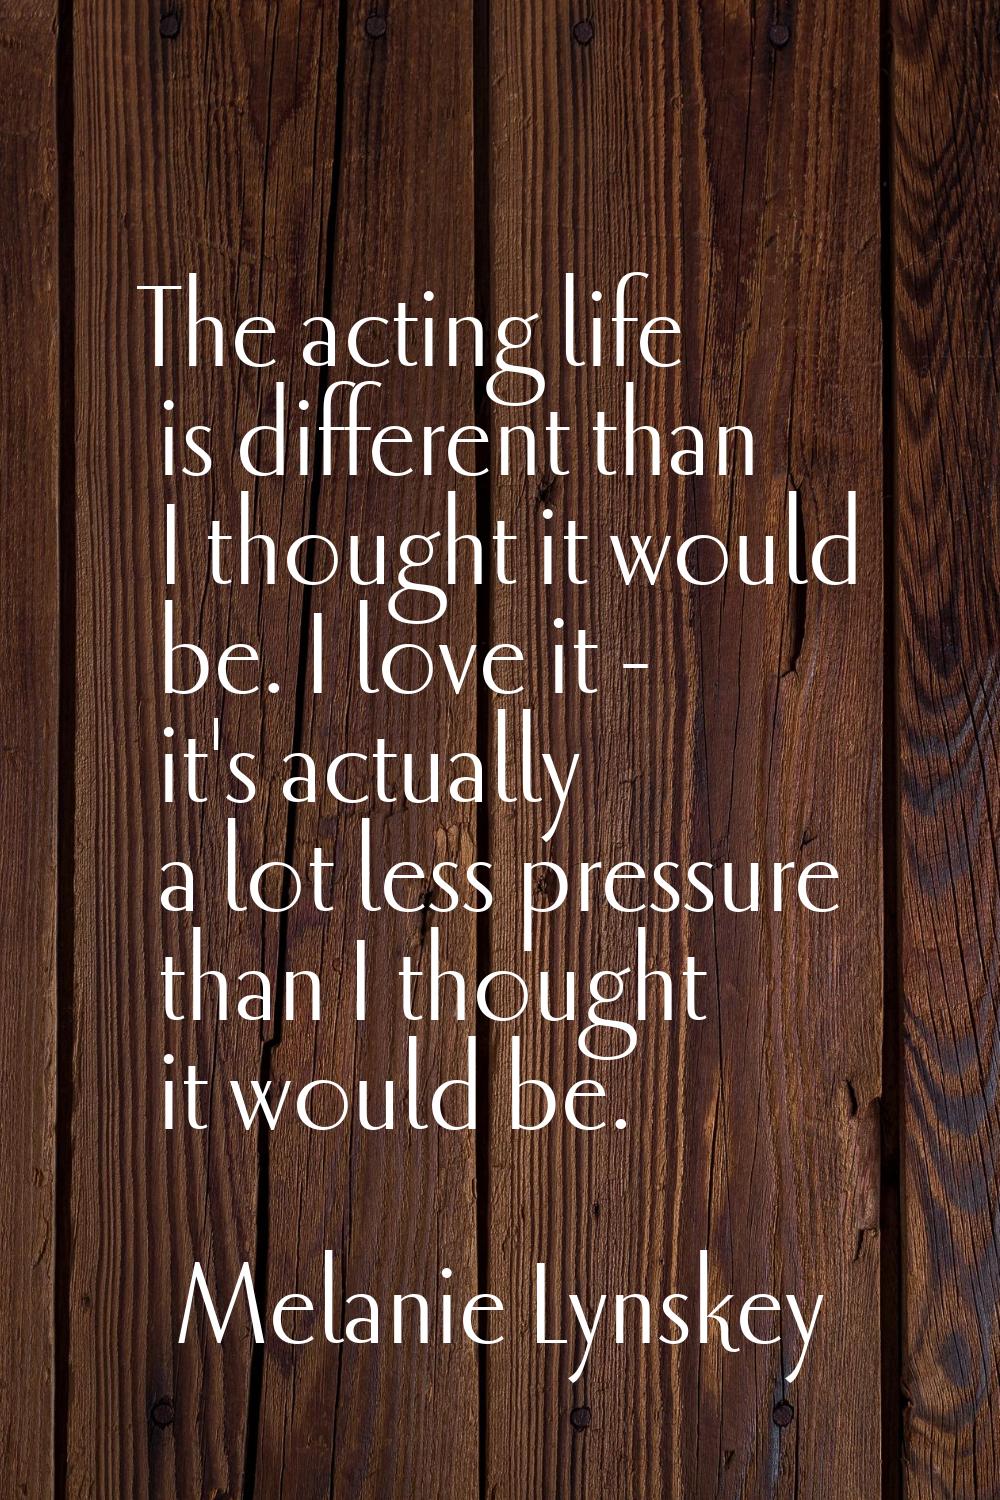 The acting life is different than I thought it would be. I love it - it's actually a lot less press